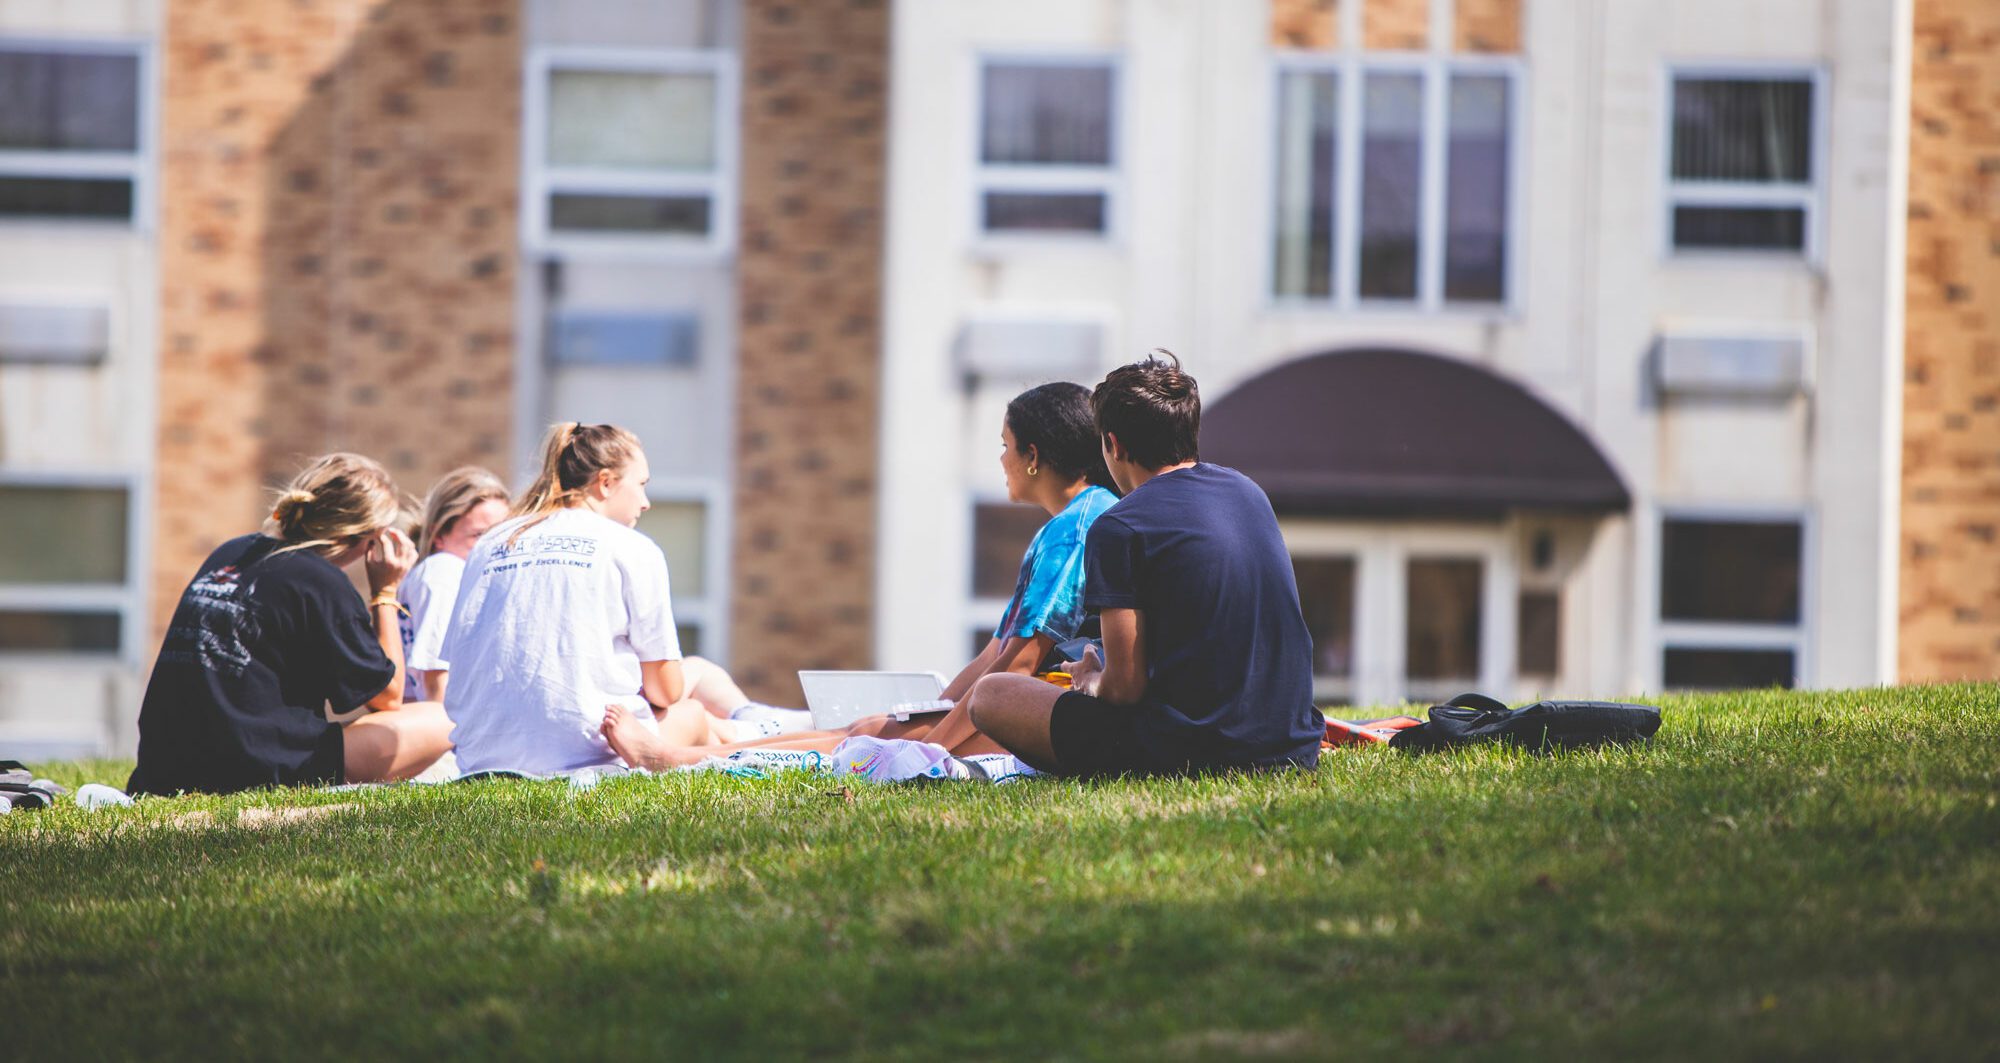 students sitting on lawn